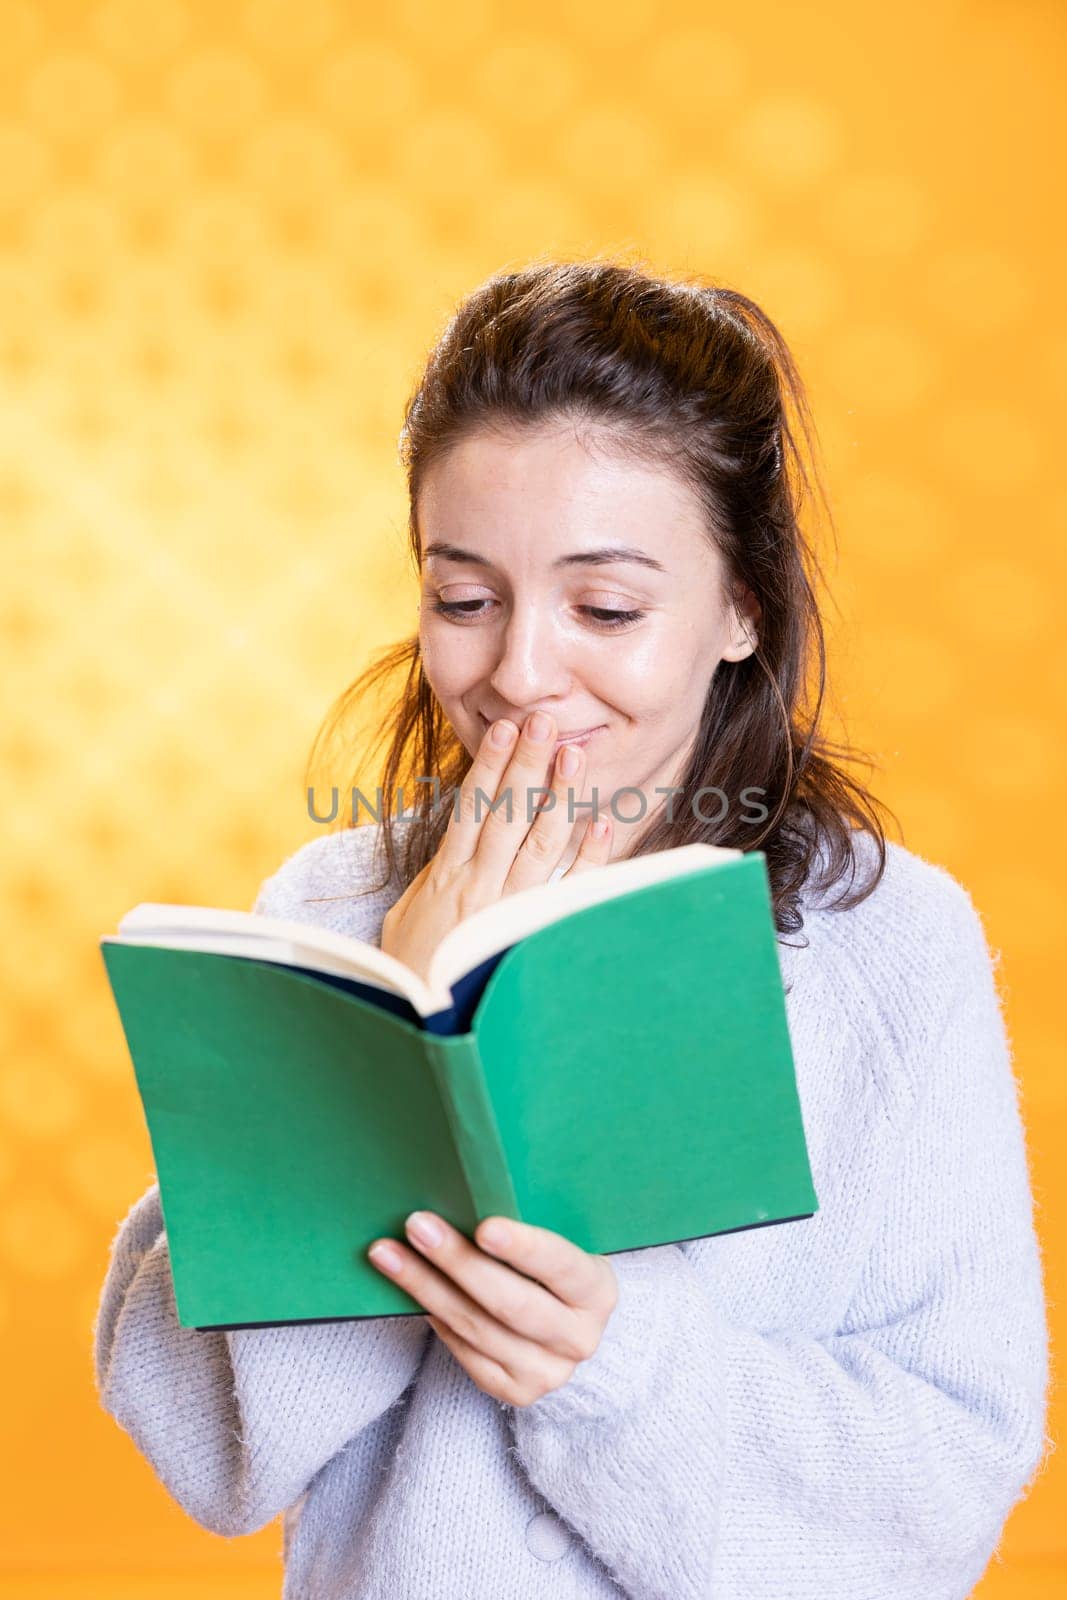 Woman amused by funny book giggles, conveying joy of reading, studio background by DCStudio